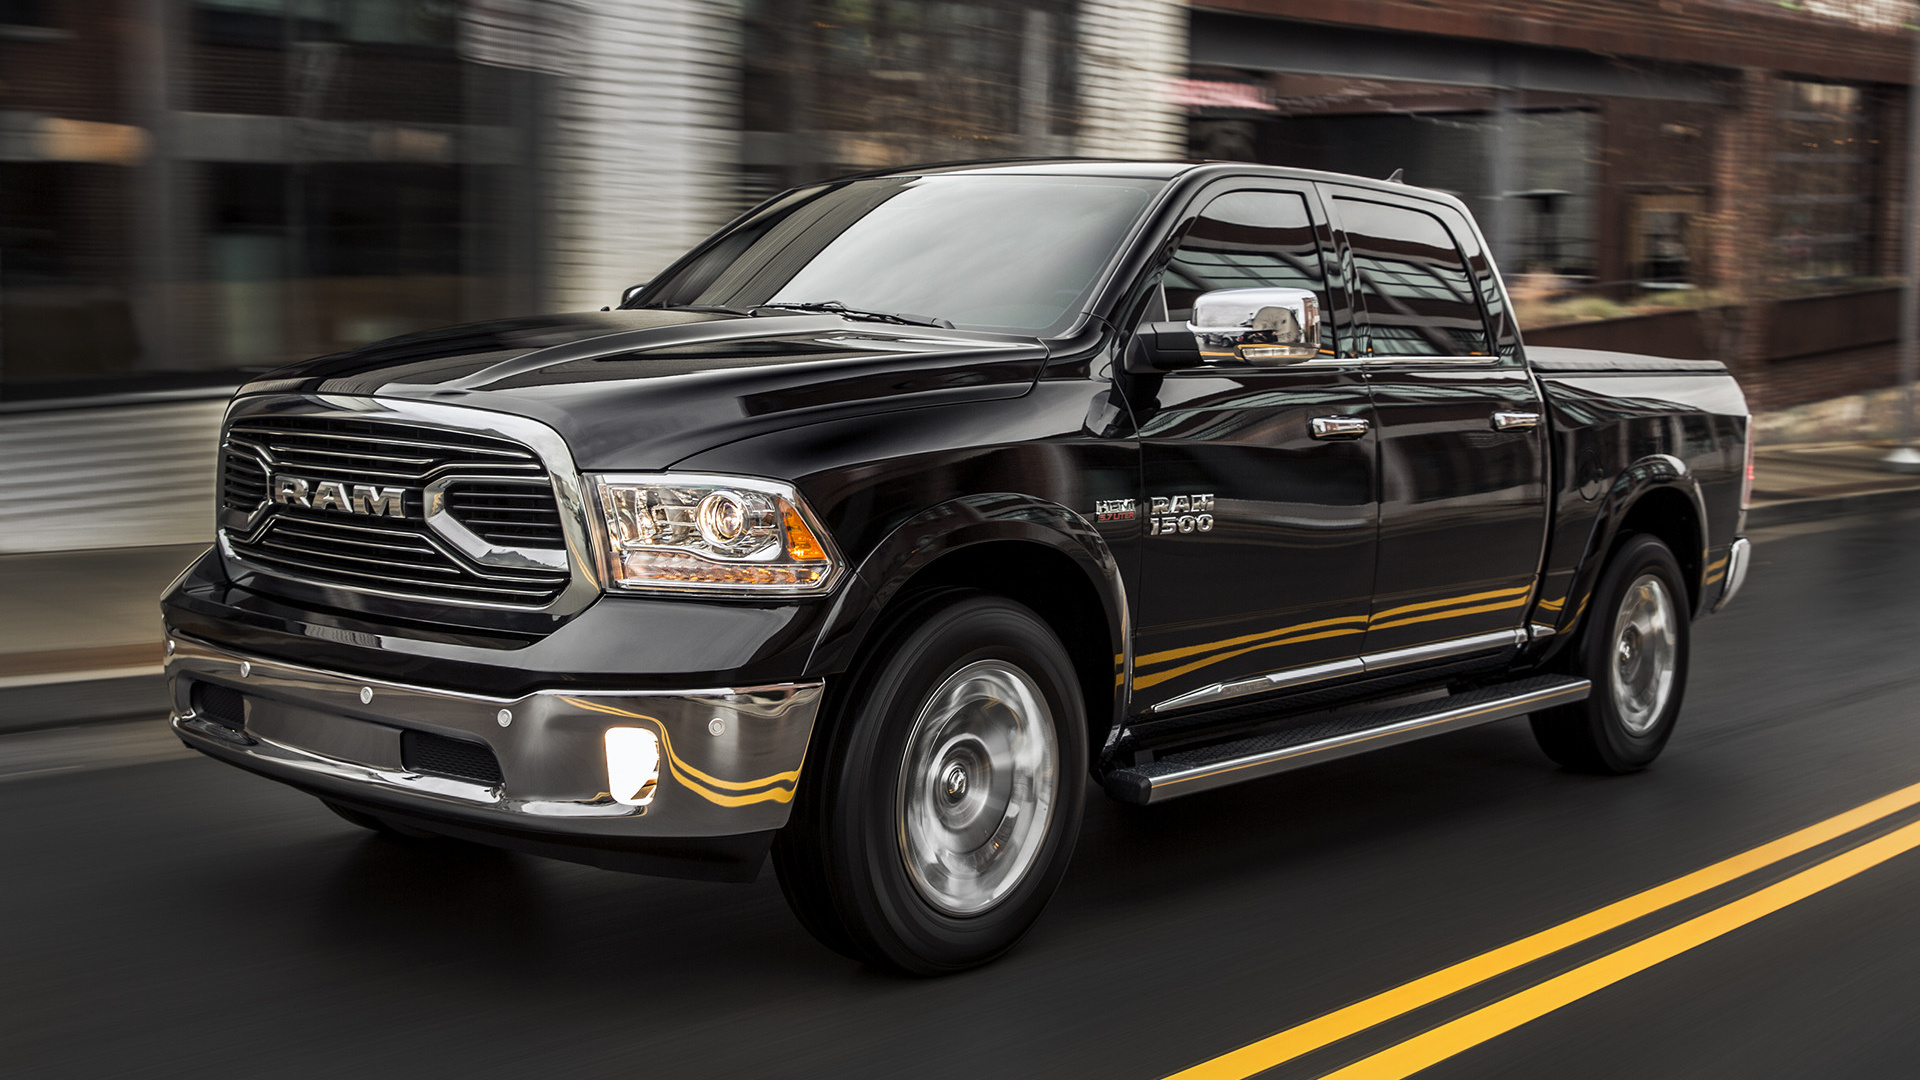 2022 Ram 1500 Laramie Limited Crew Cab Wallpapers and HD 